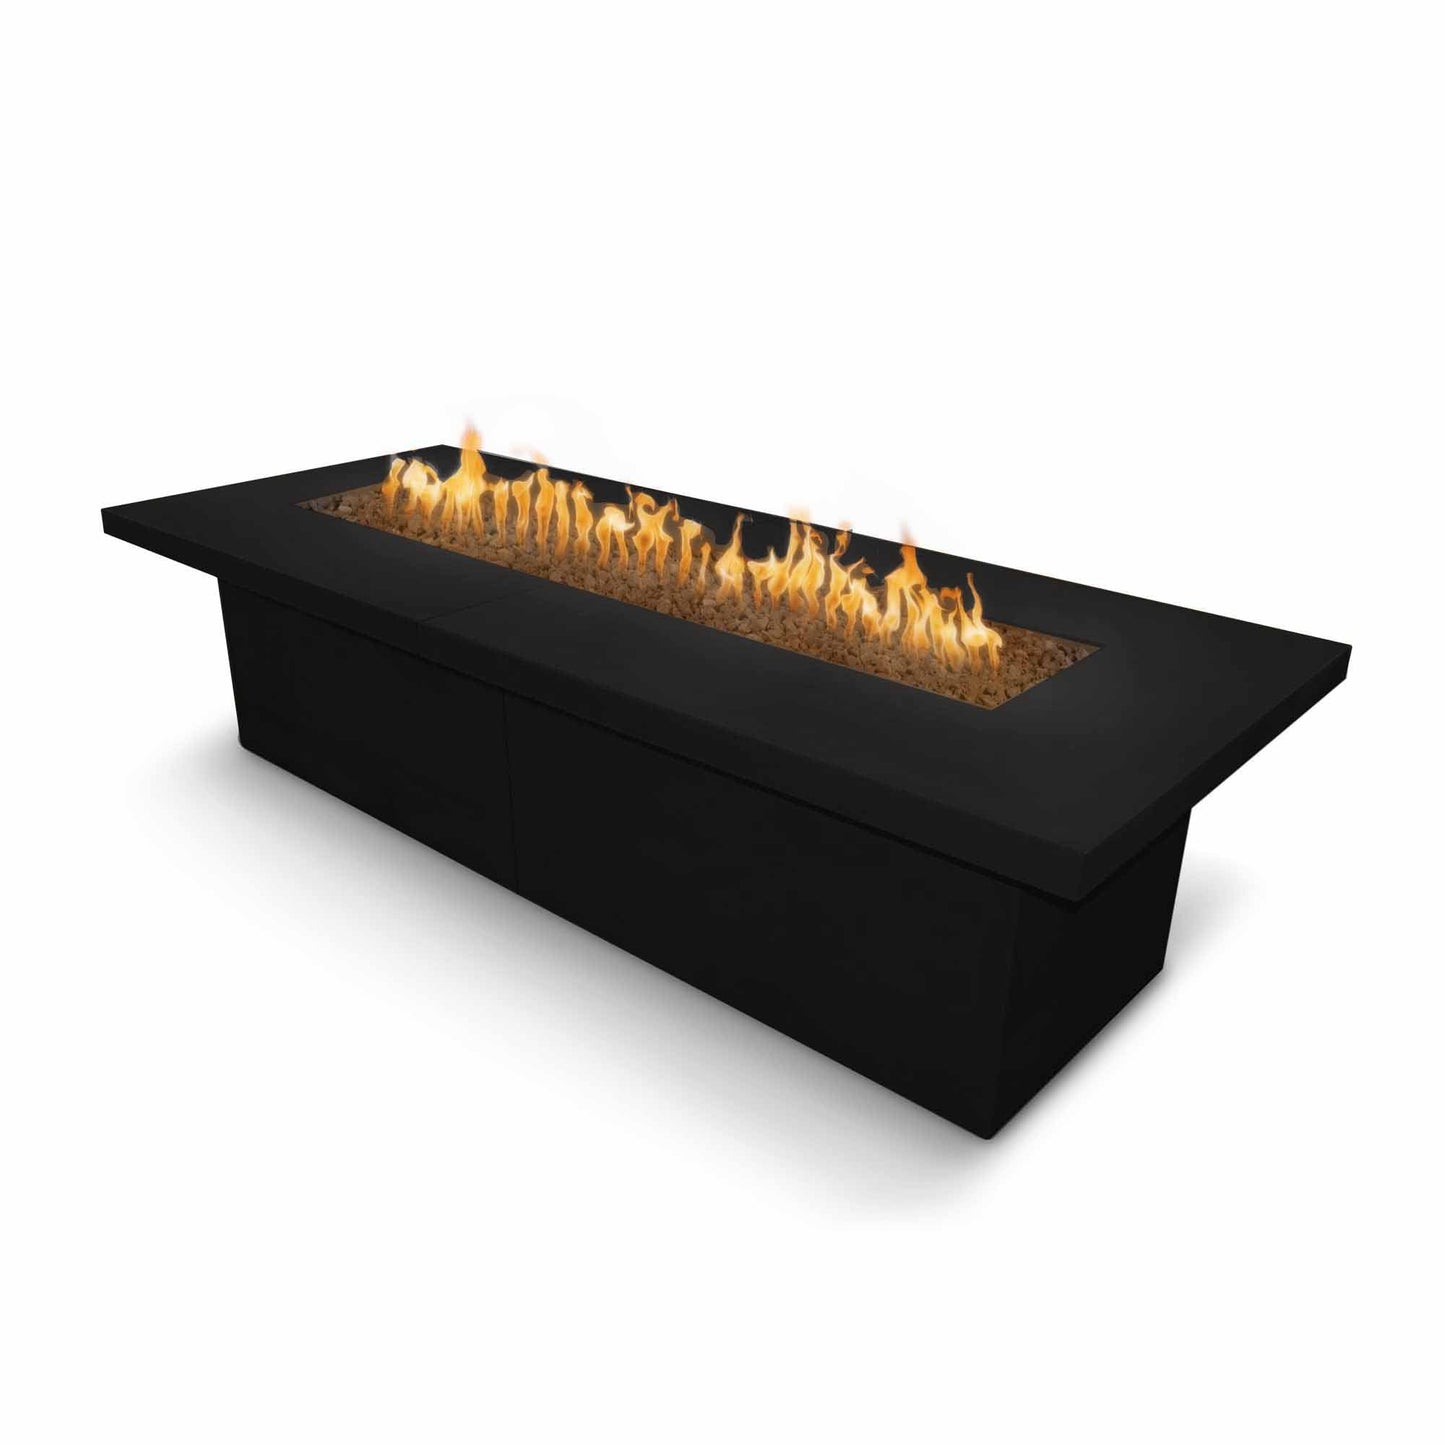 The Outdoor Plus Rectangular Newport 144" Java Powder Coated Metal Liquid Propane Fire Pit with Match Lit Ignition